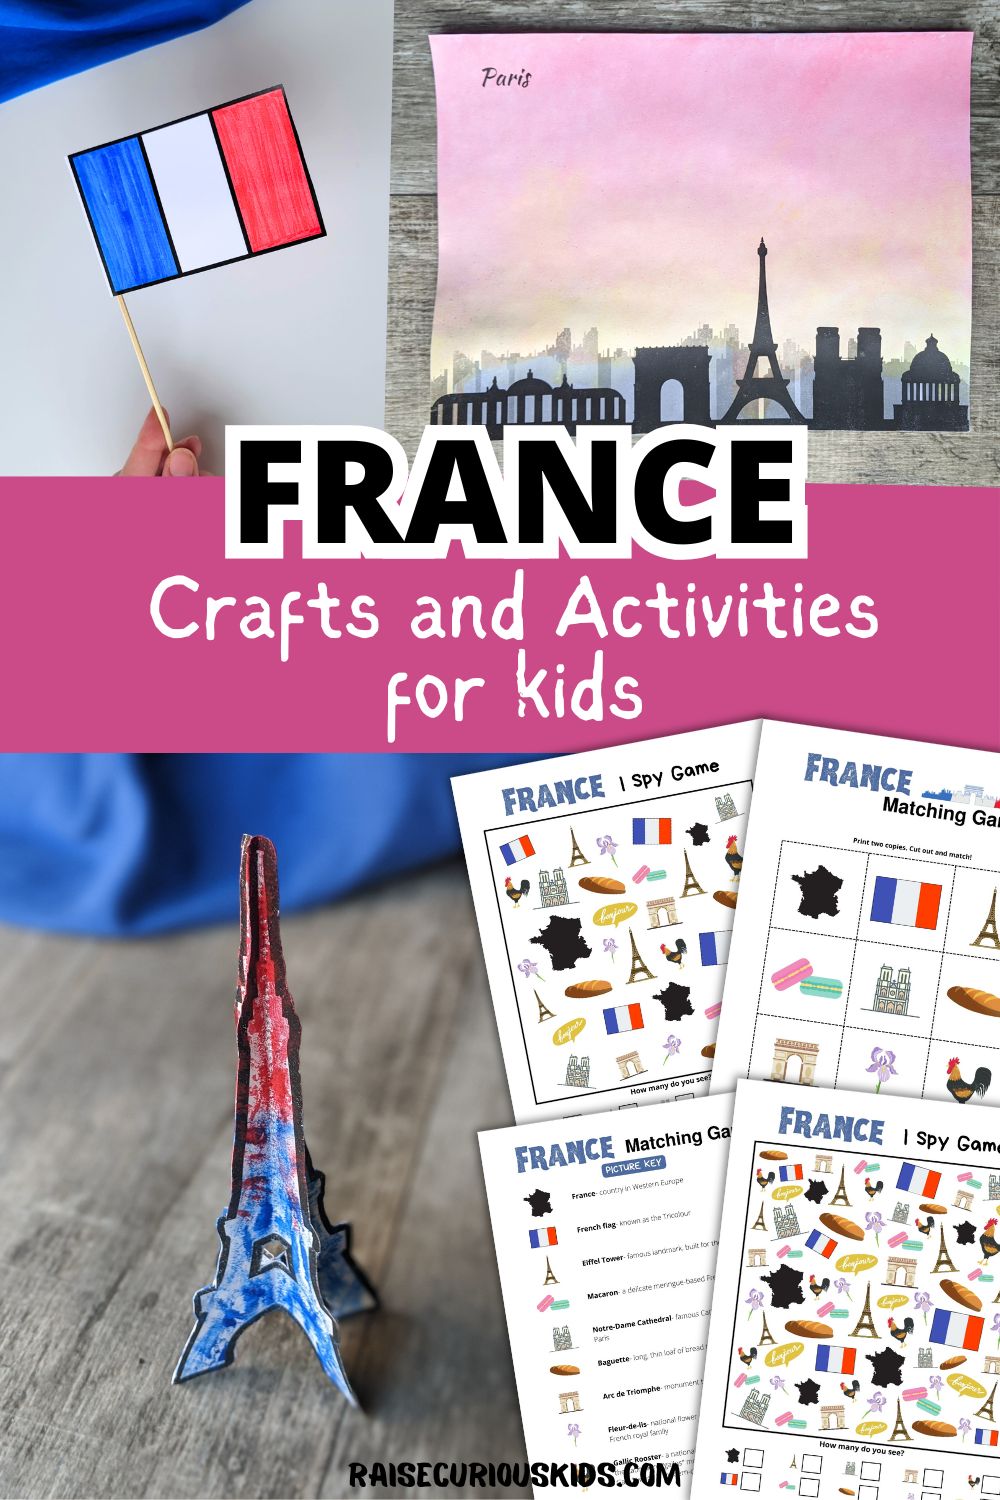 France Crafts and Activities for Kids - Raise Curious Kids